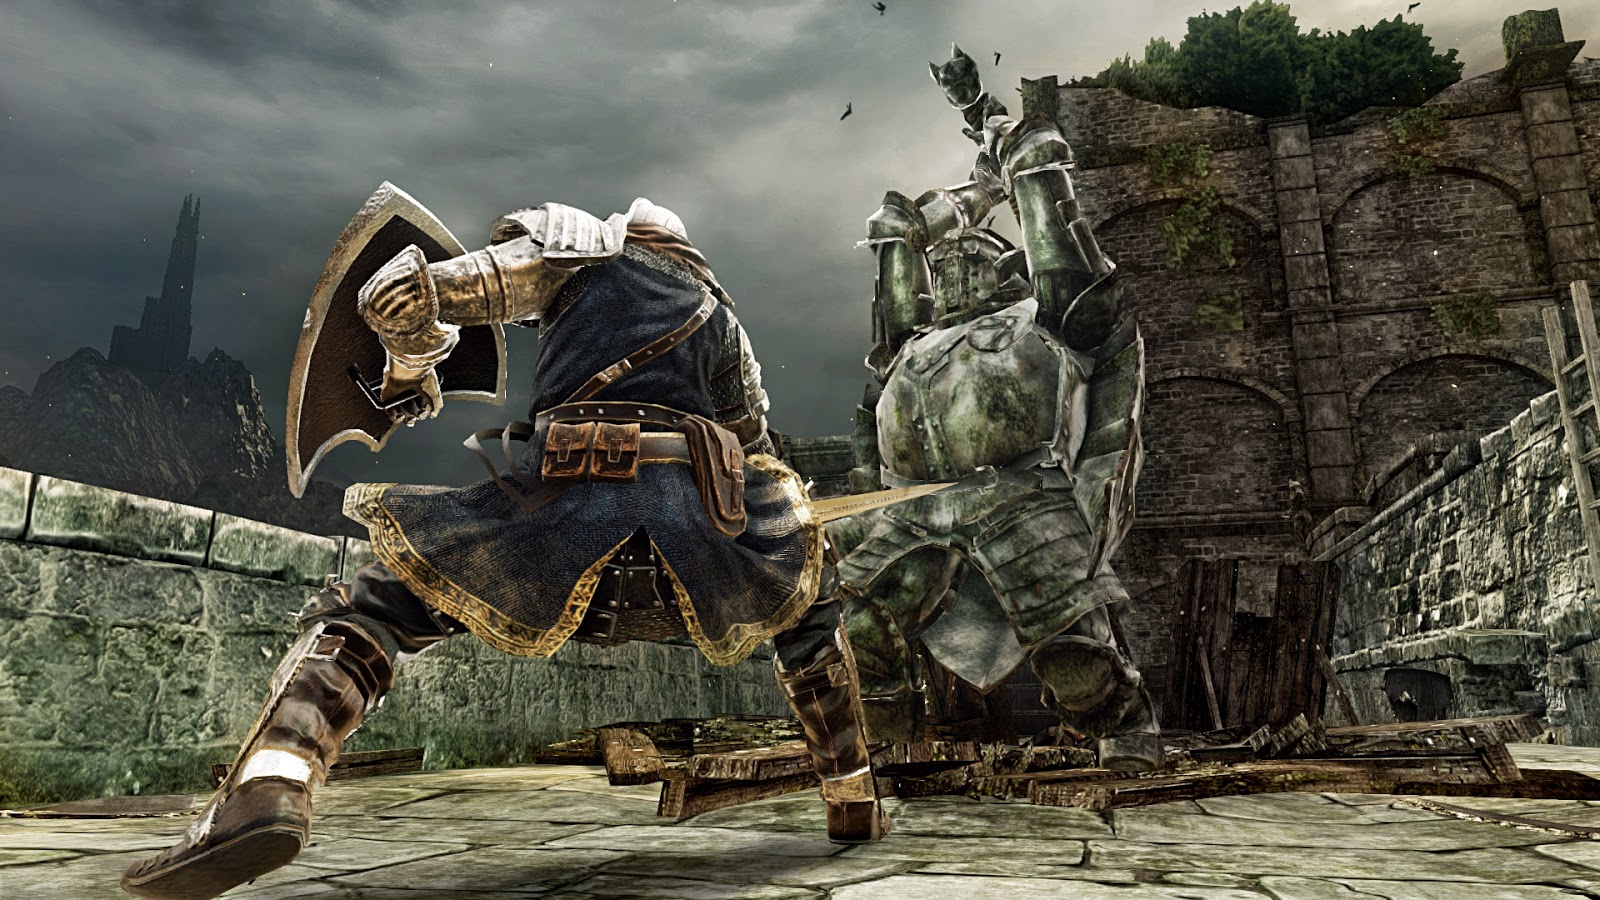 Dark Souls Ii Scholar Of The First Sin V1 02 All Dlcs For Pc 6 8 Gb Highly Compressed Repack Pc Games Realm Download Your Favorite Pc Games For Free And Directly